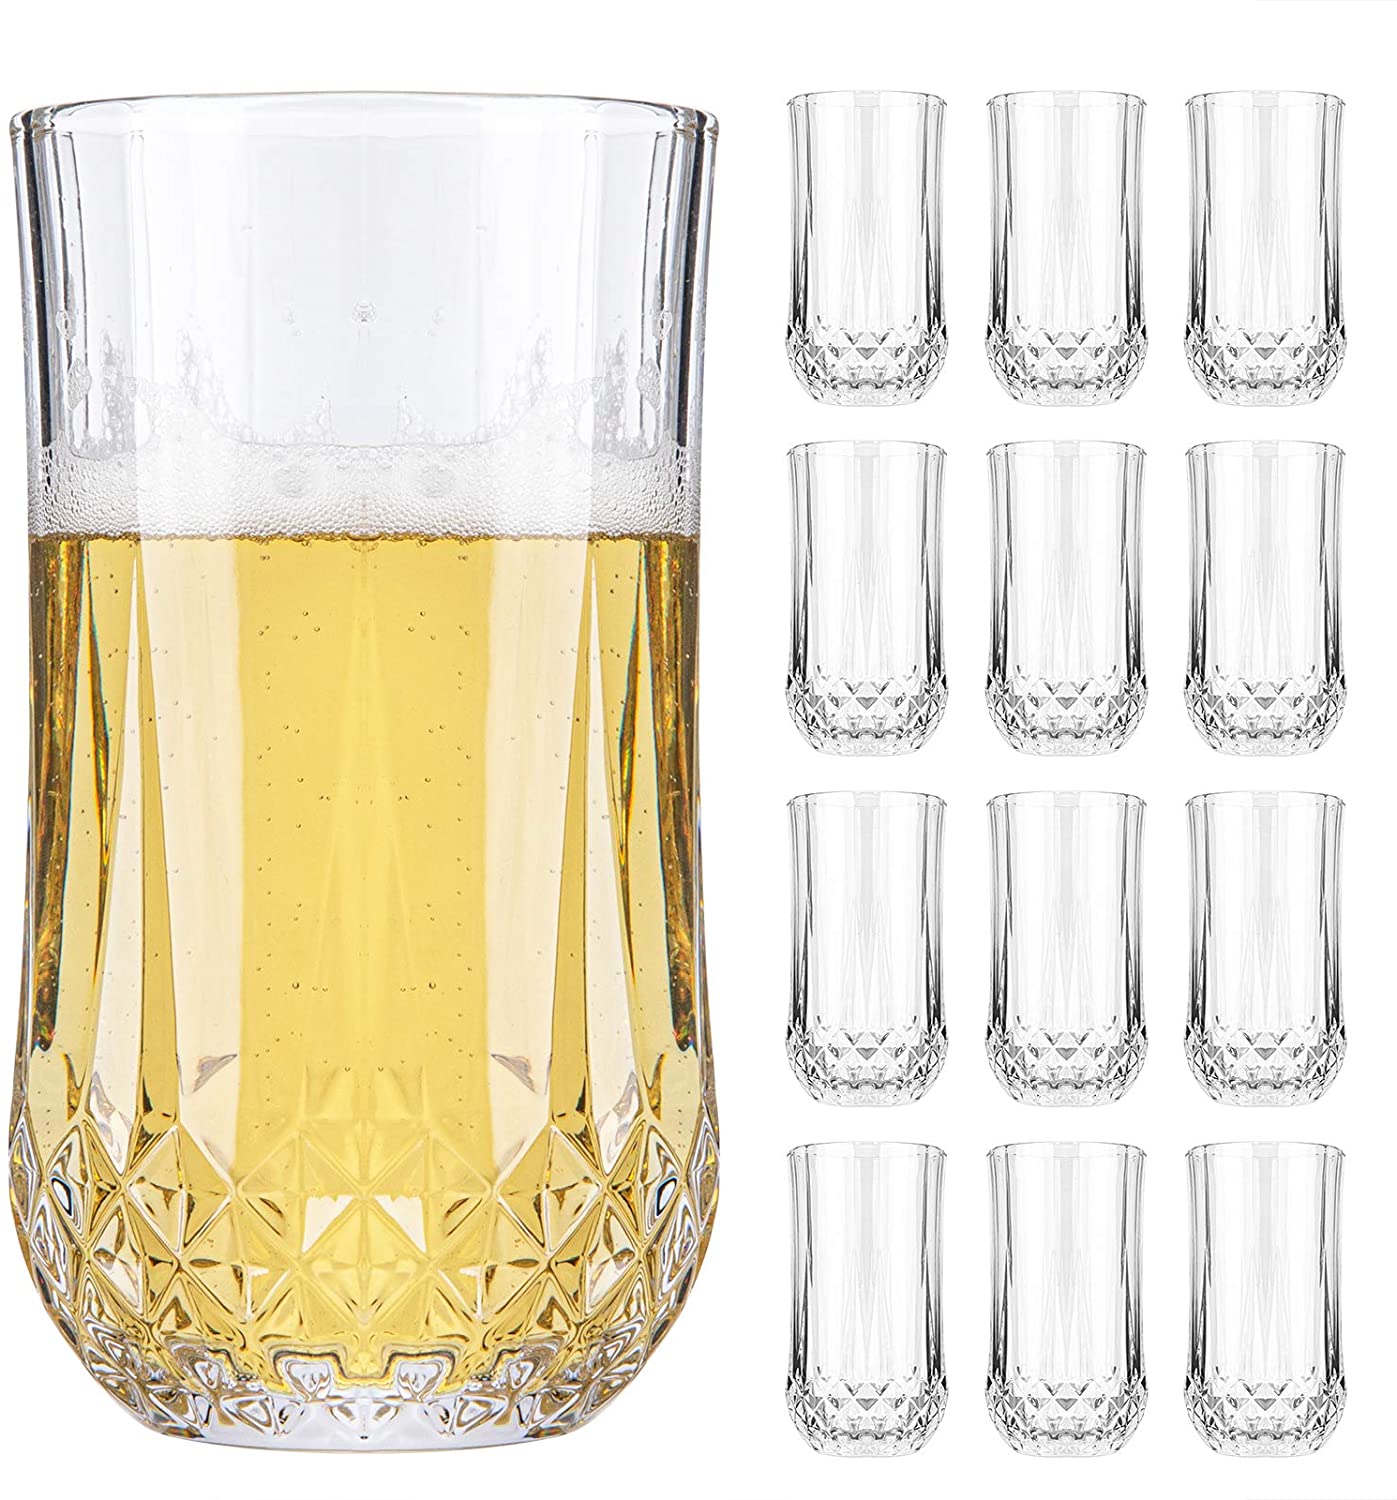 Highball Glasses Set Of 12 11 Ounce Cups Highball Tumbler Drinking Glasses Lead Free Crystal